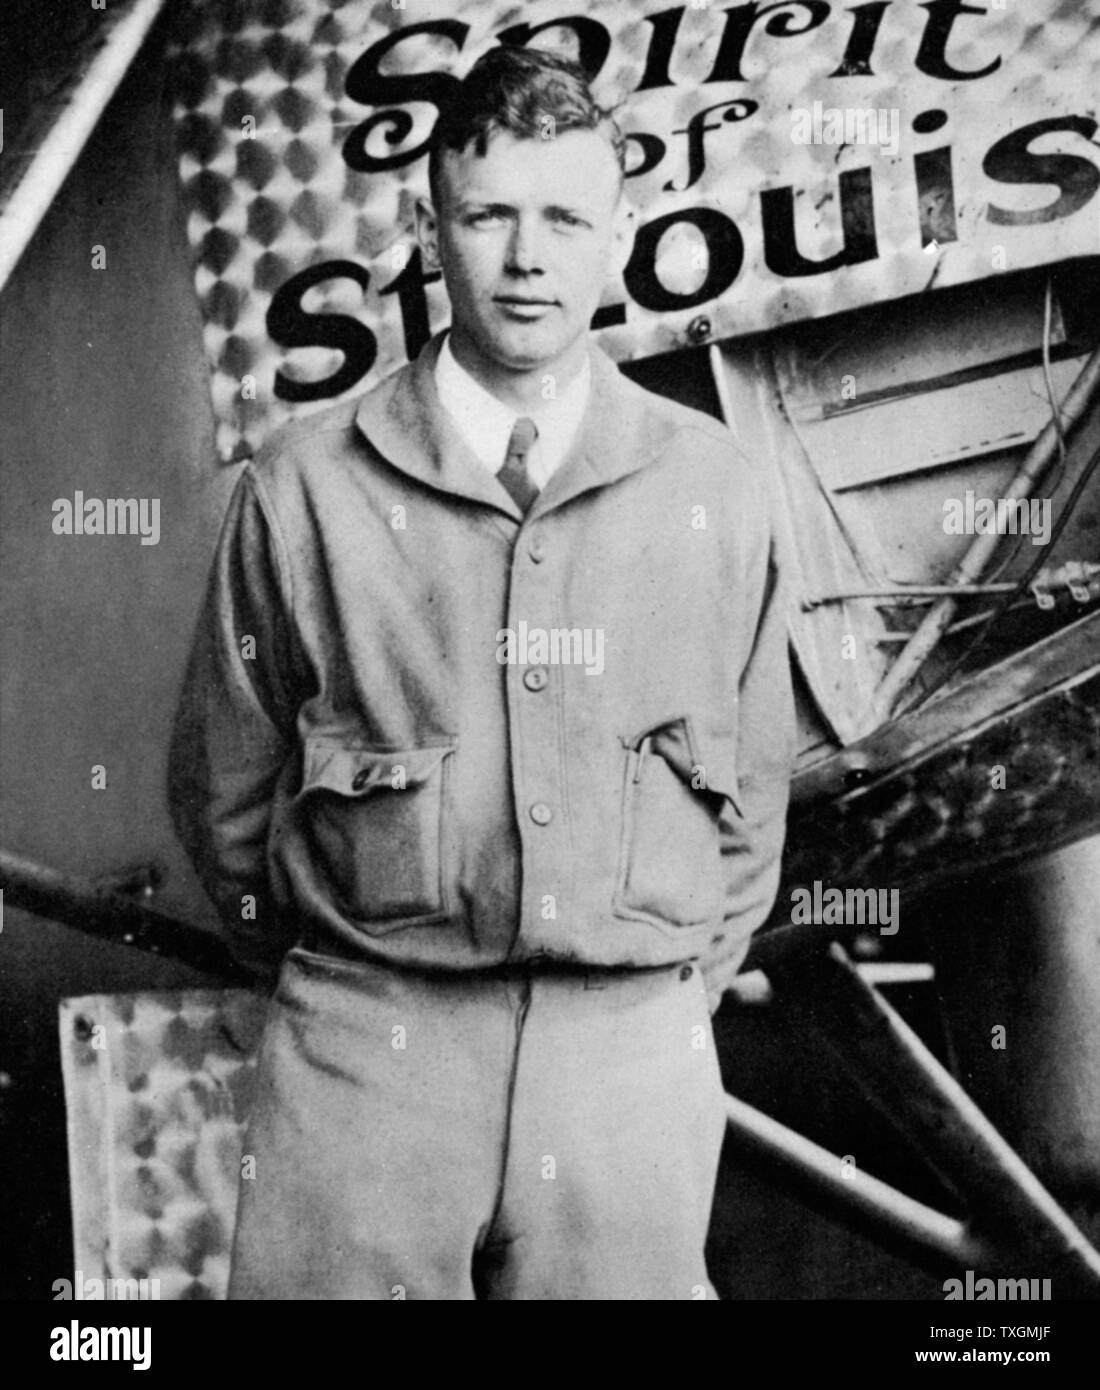 Charles Lindbergh (1902-1974) in his flying kit standing by the 'Spirit of St Louis', the plane in which he made the first non-stop Atlantic air crossing: 20-21 May, 1927. Landed at Le Bourget Airdrome, Paris, after a flight of 33.5 hours. Stock Photo